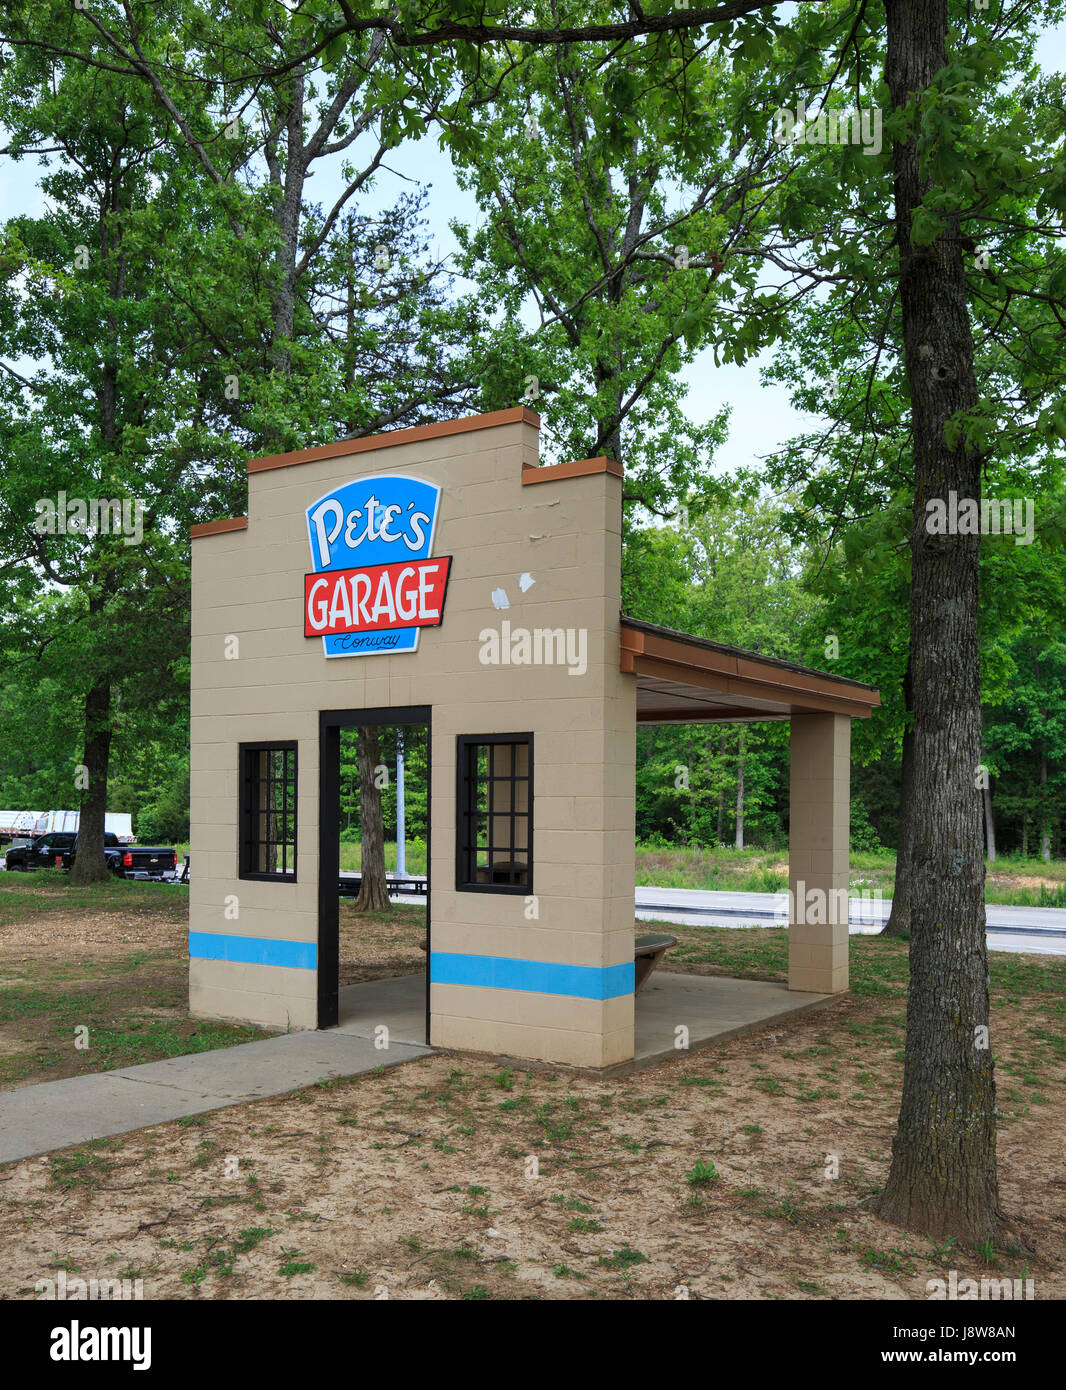 Picnic bench shelter in the shape of a structure you might see along Route 66 in Missouri Stock Photo